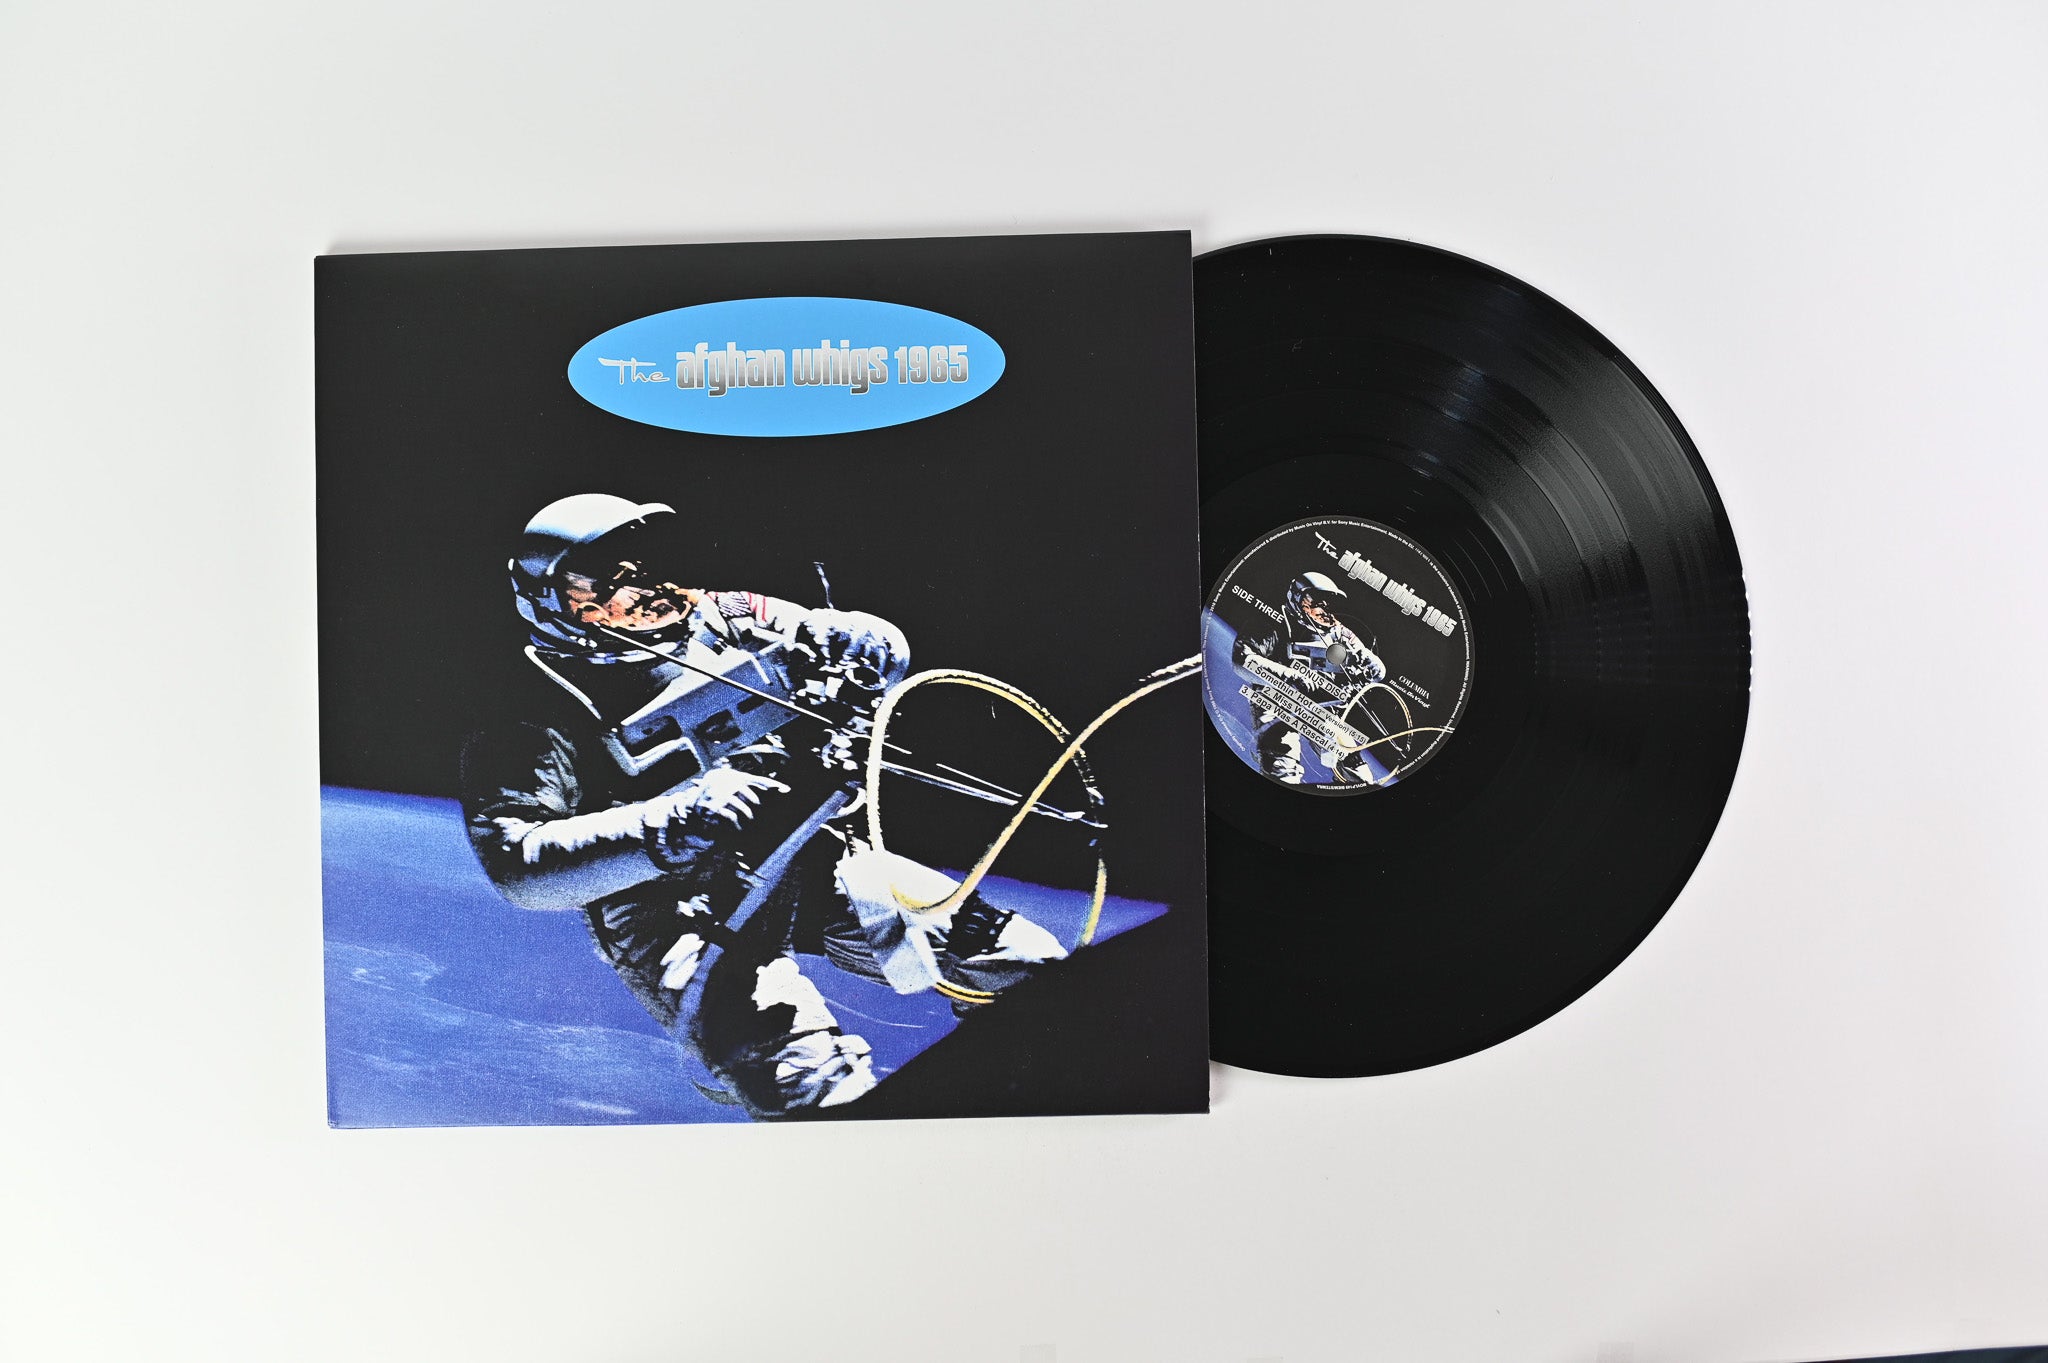 The Afghan Whigs - 1965 on Music On Vinyl Reissue